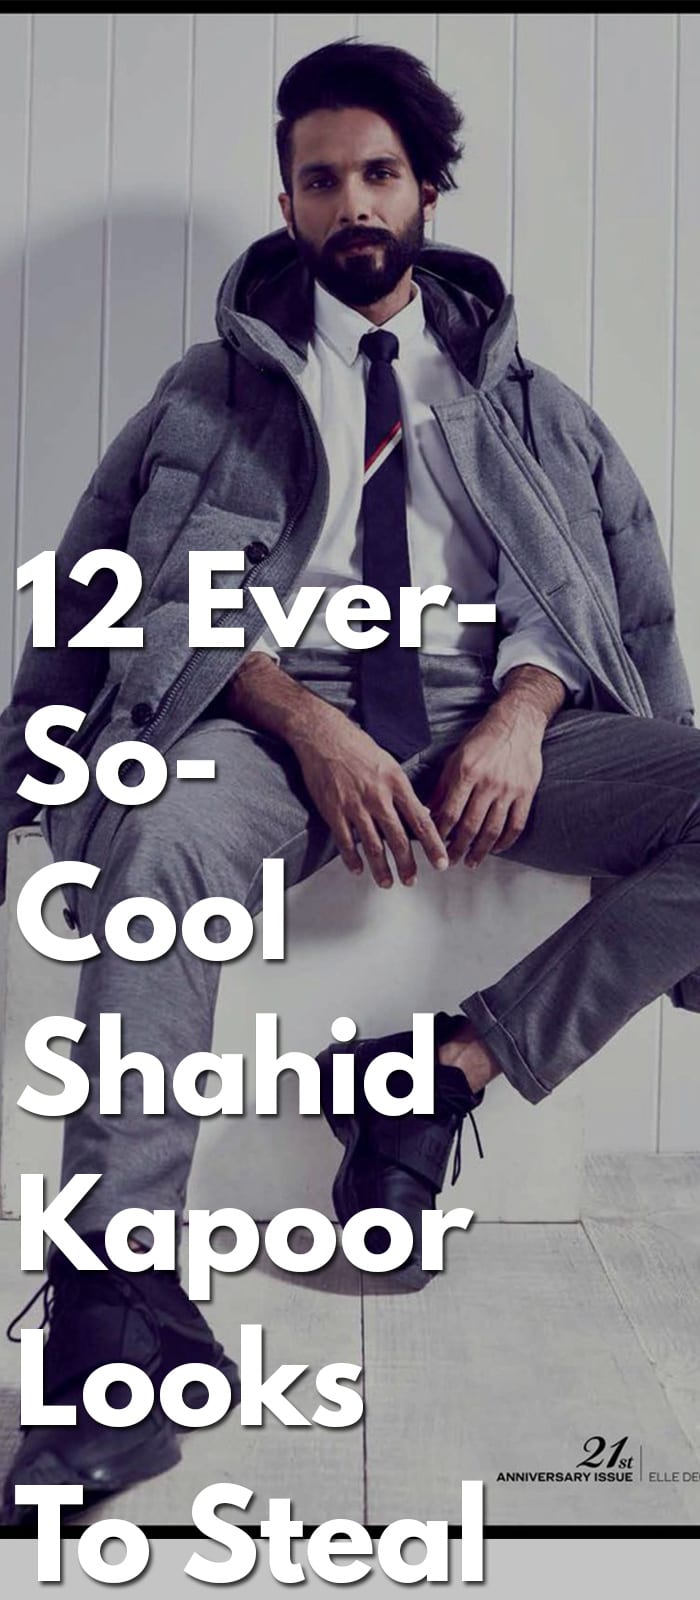 12 Ever-So-Cool Shahid Kapoor Looks To Steal